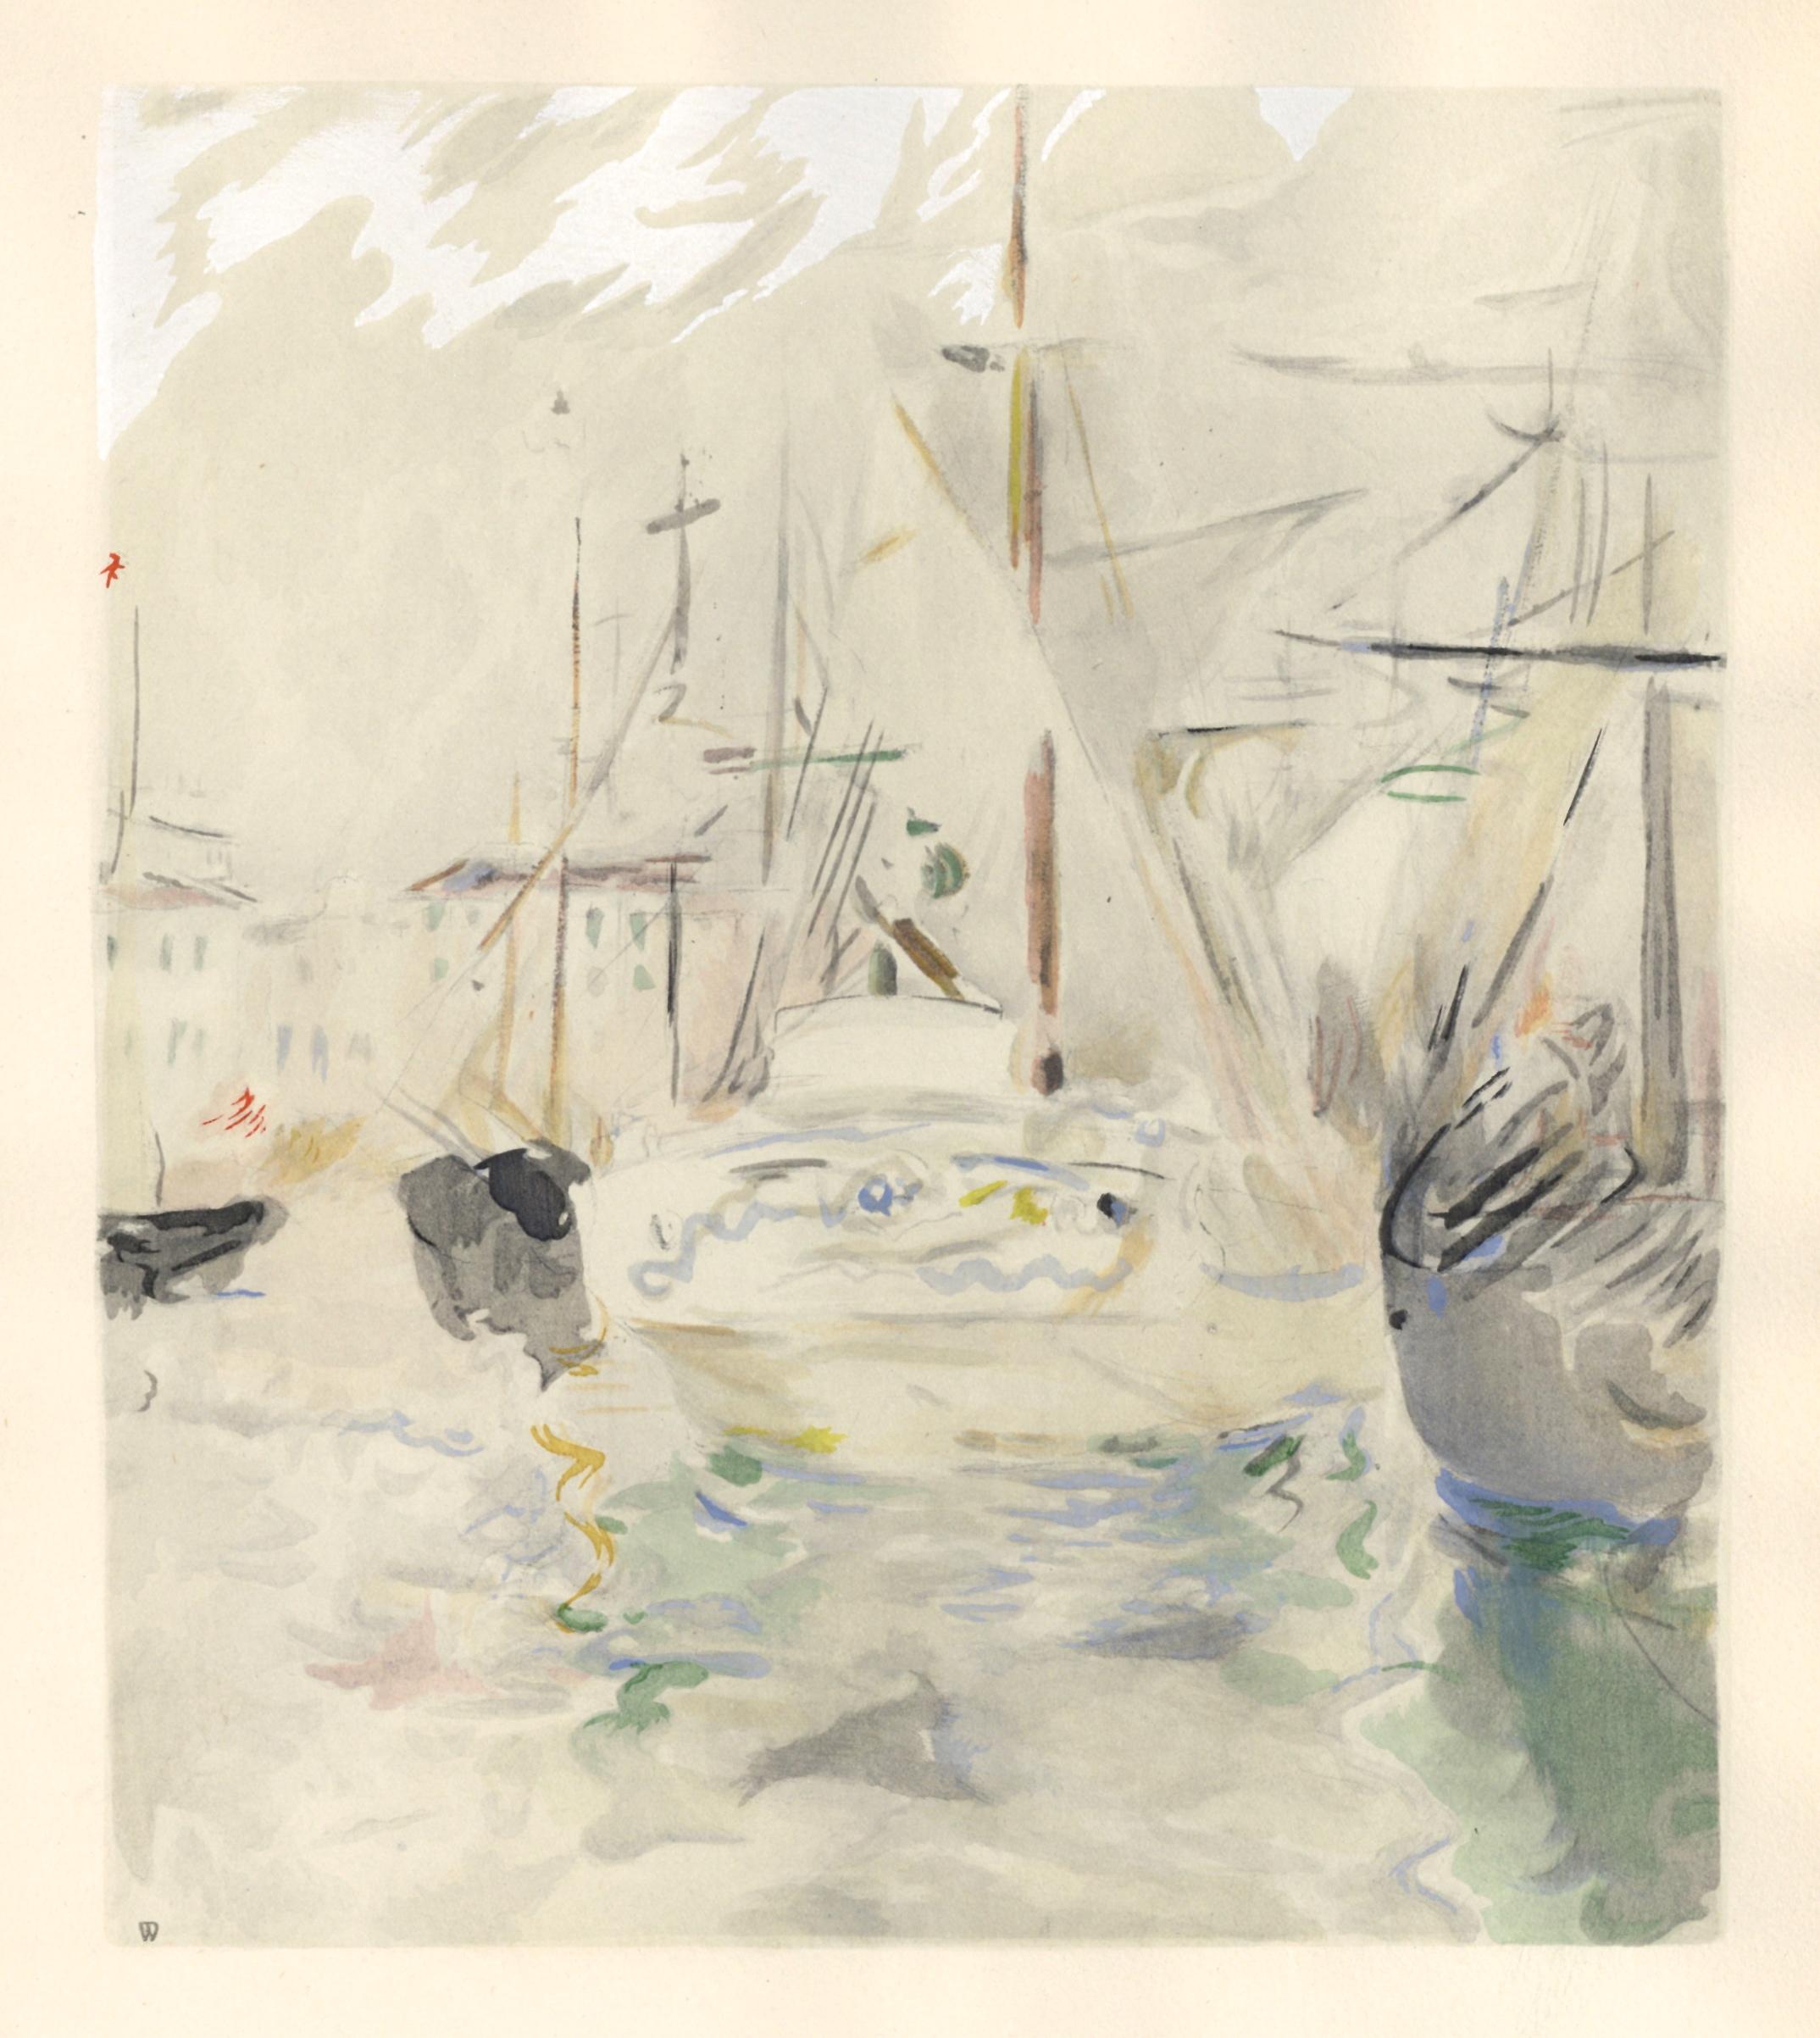 Medium: pochoir (after the 1881 watercolor). Printed 1946 in a limited edition of 300 for the rare "Berthe Morisot Seize Aquarelles" portfolio, published in Paris by Quatre Chemins. The image measures 8 x 9 inches (233 x 203 mm). The total sheet is